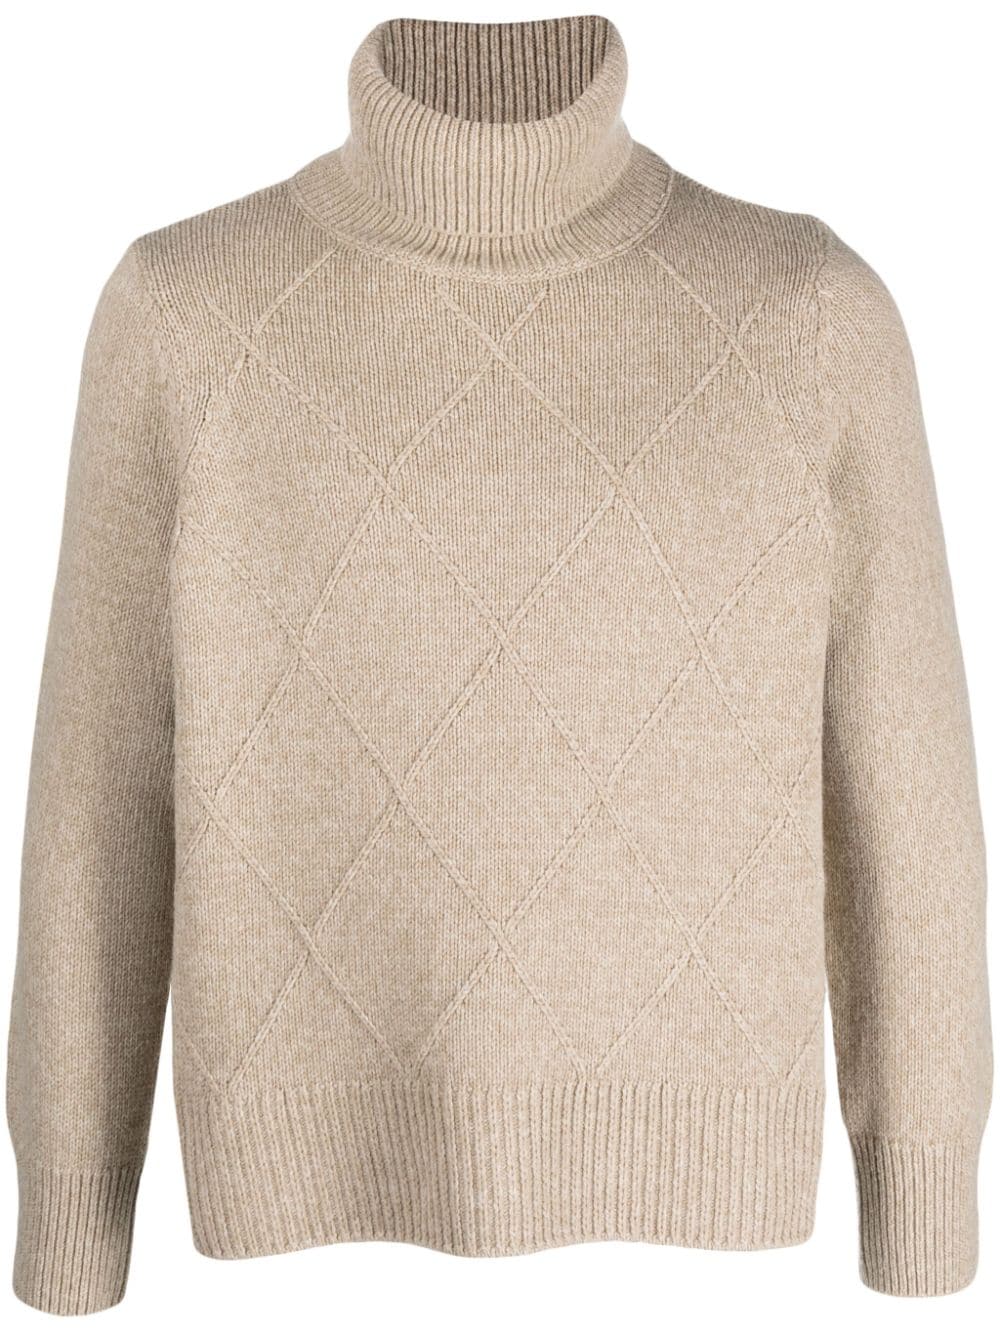 Barbour roll-neck Knitted Jumper - Farfetch